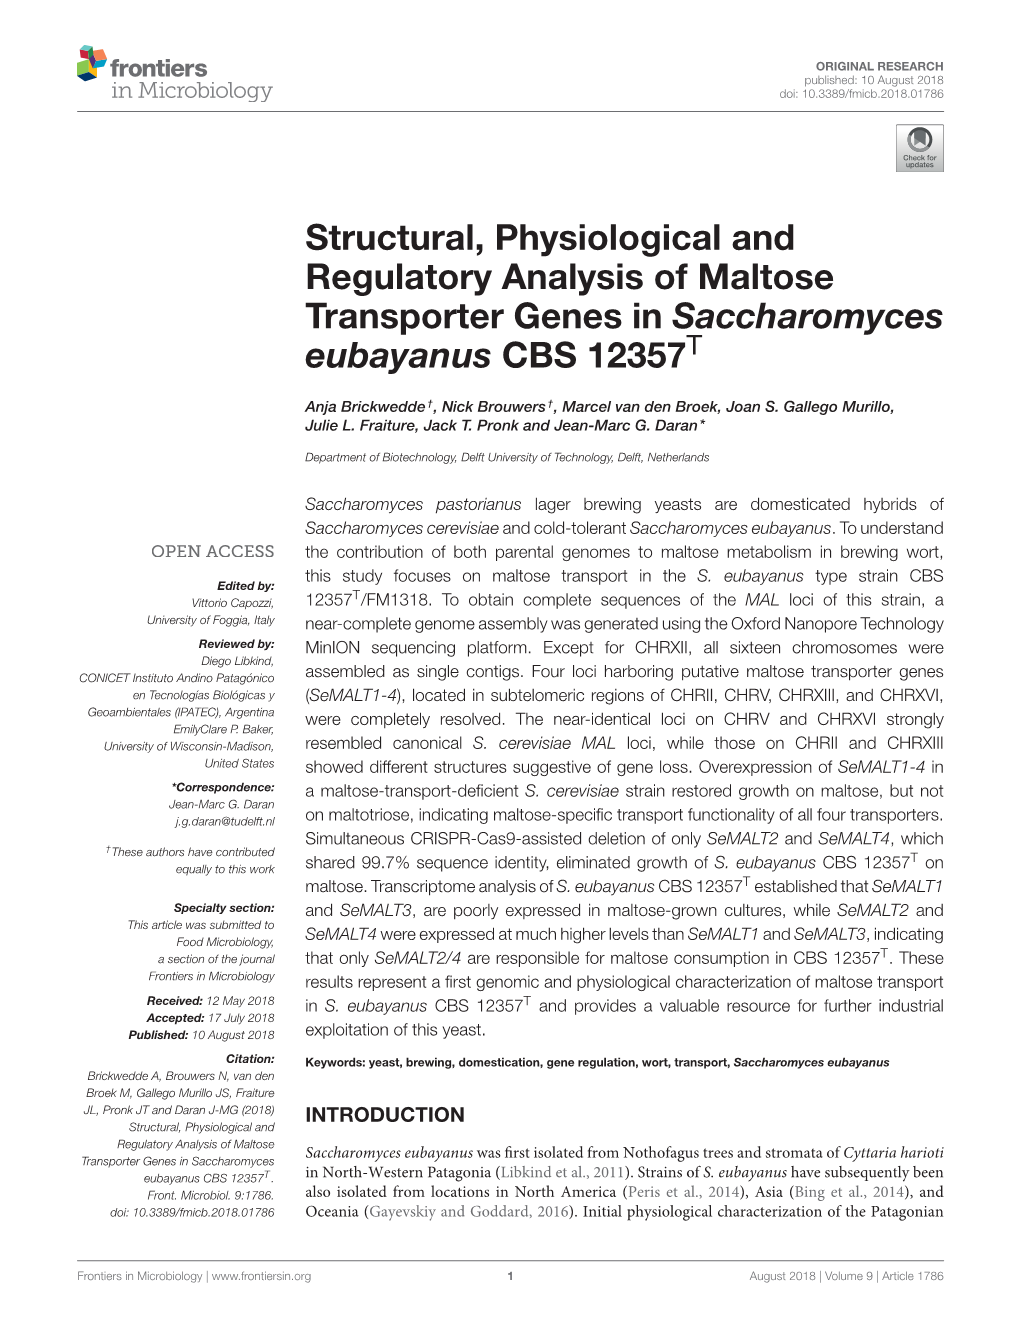 Structural, Physiological and Regulatory Analysis of Maltose Transporter Genes in Saccharomyces Eubayanus CBS 12357T